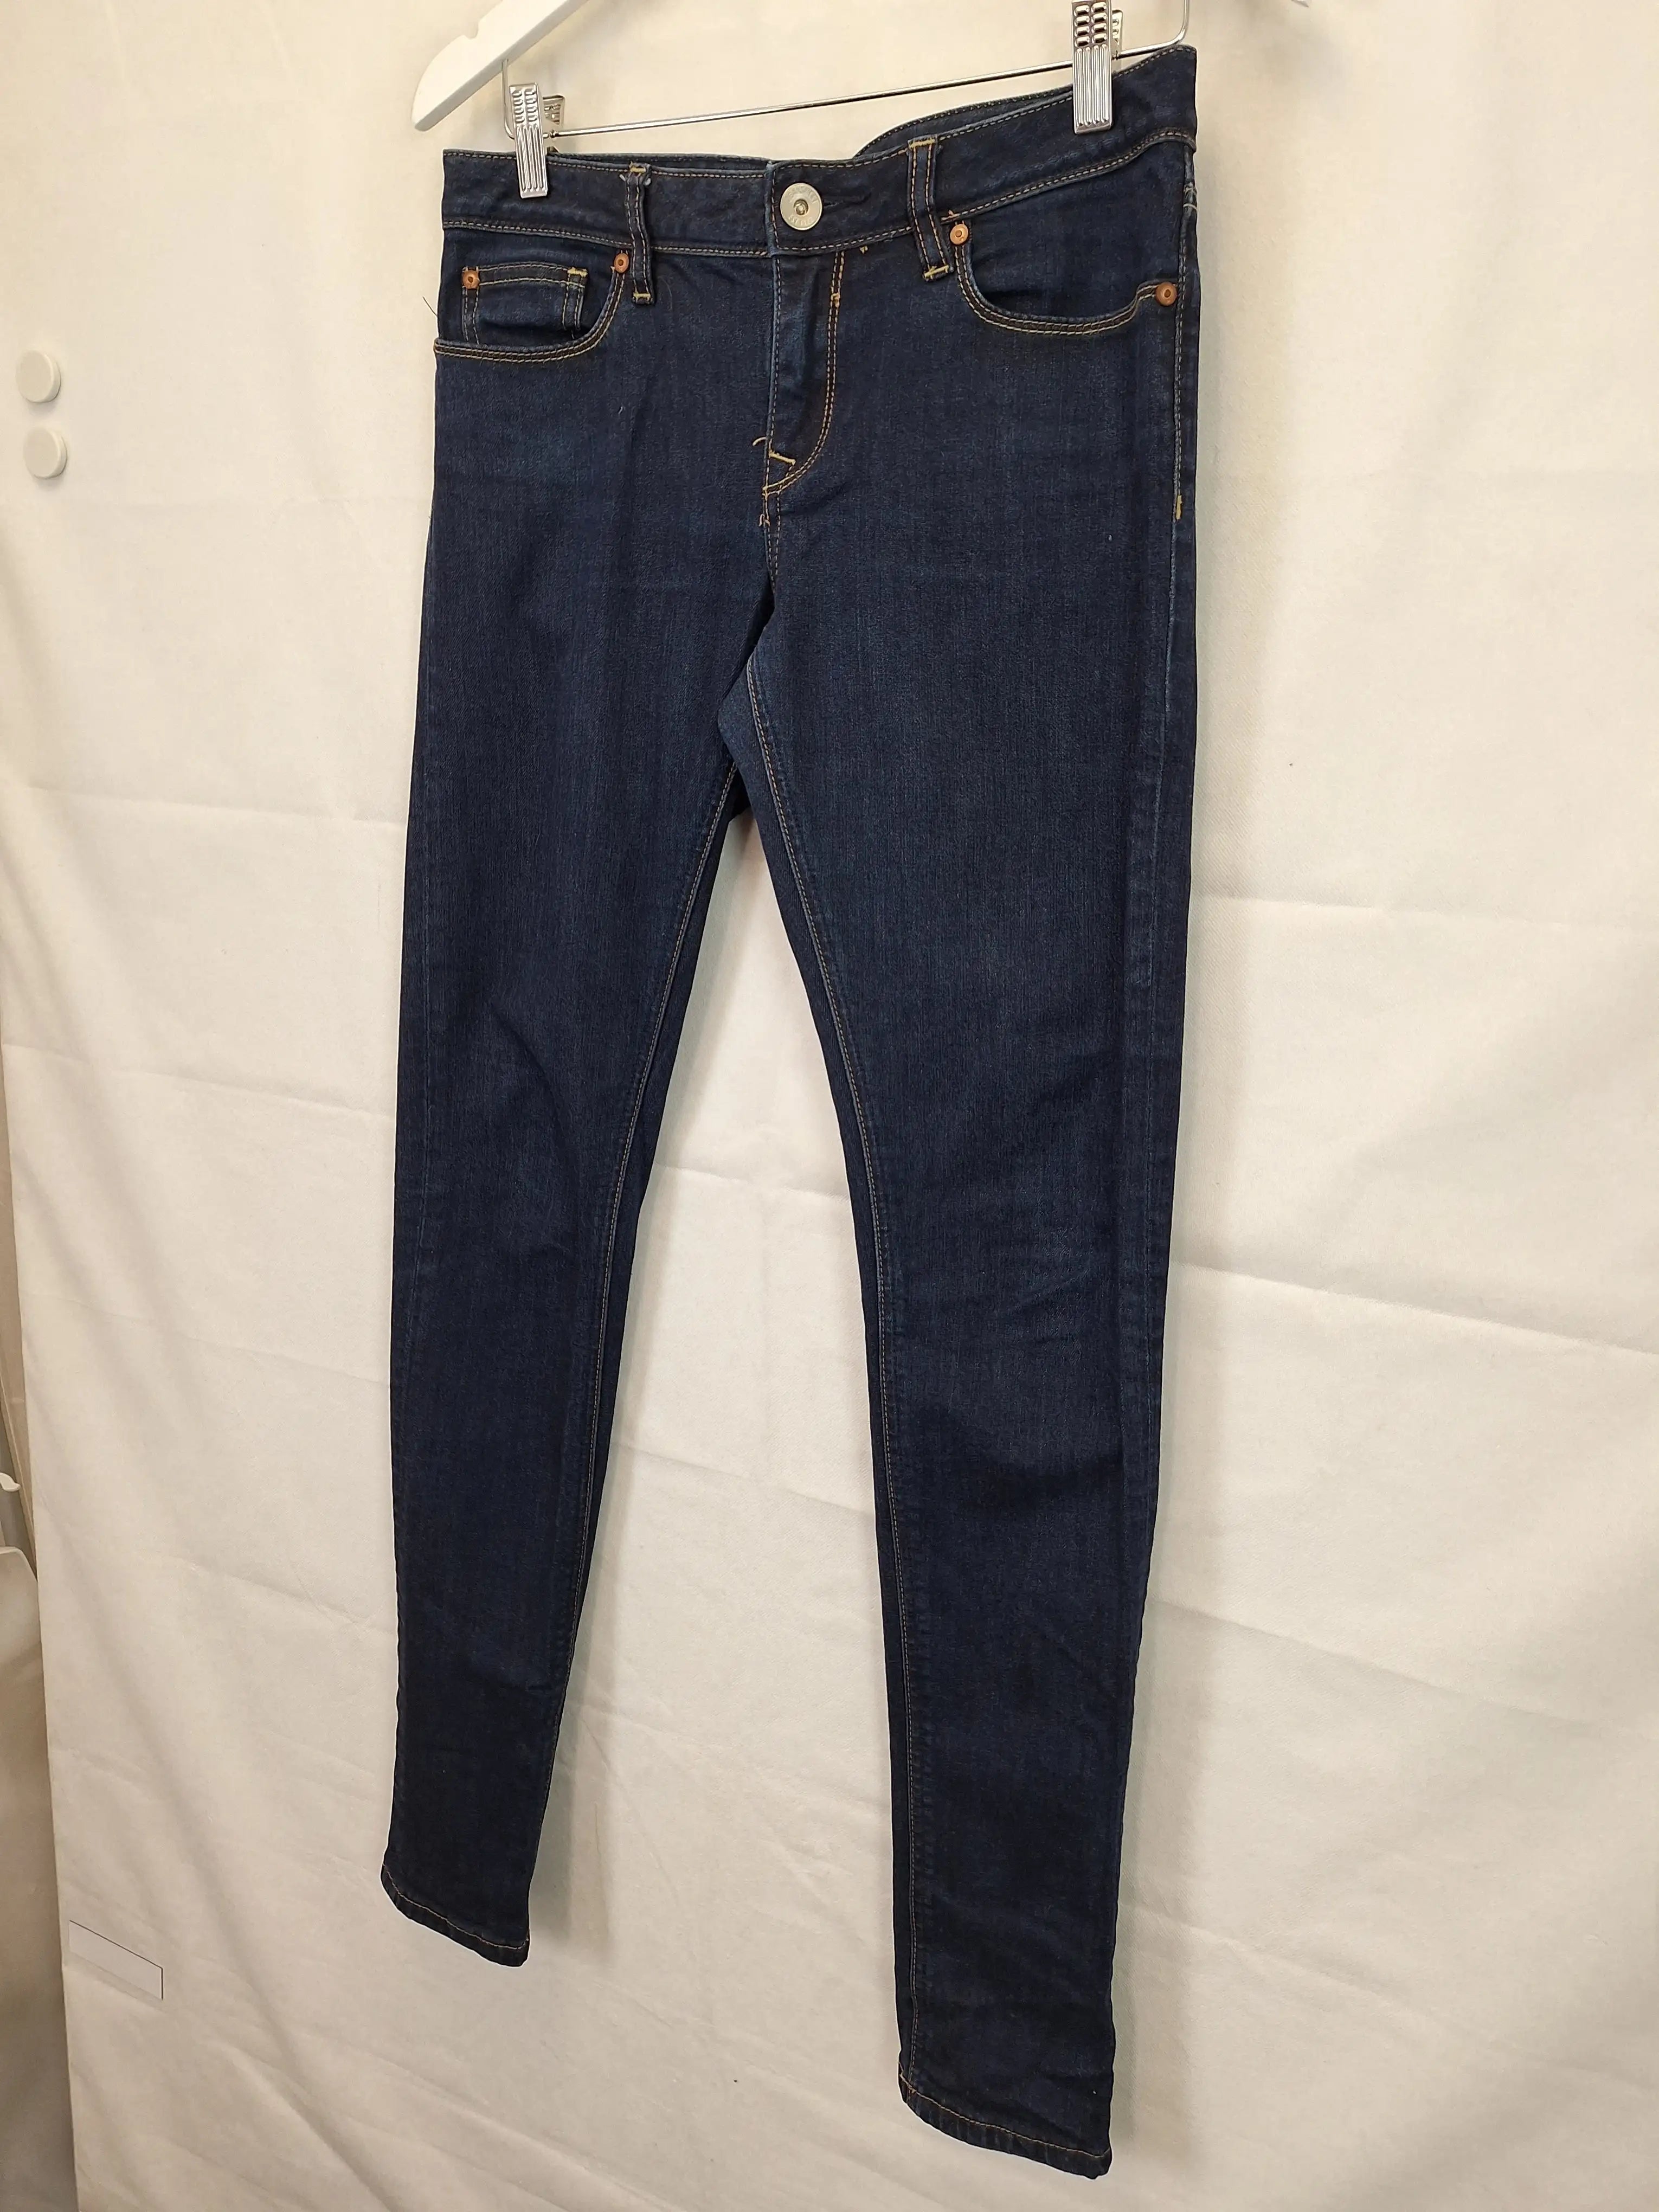 Jeanswest Super Skinny Denim Jeans Size 10 by SwapUp Online Second Hand Store Thrift Store Op Shop 1696373866721